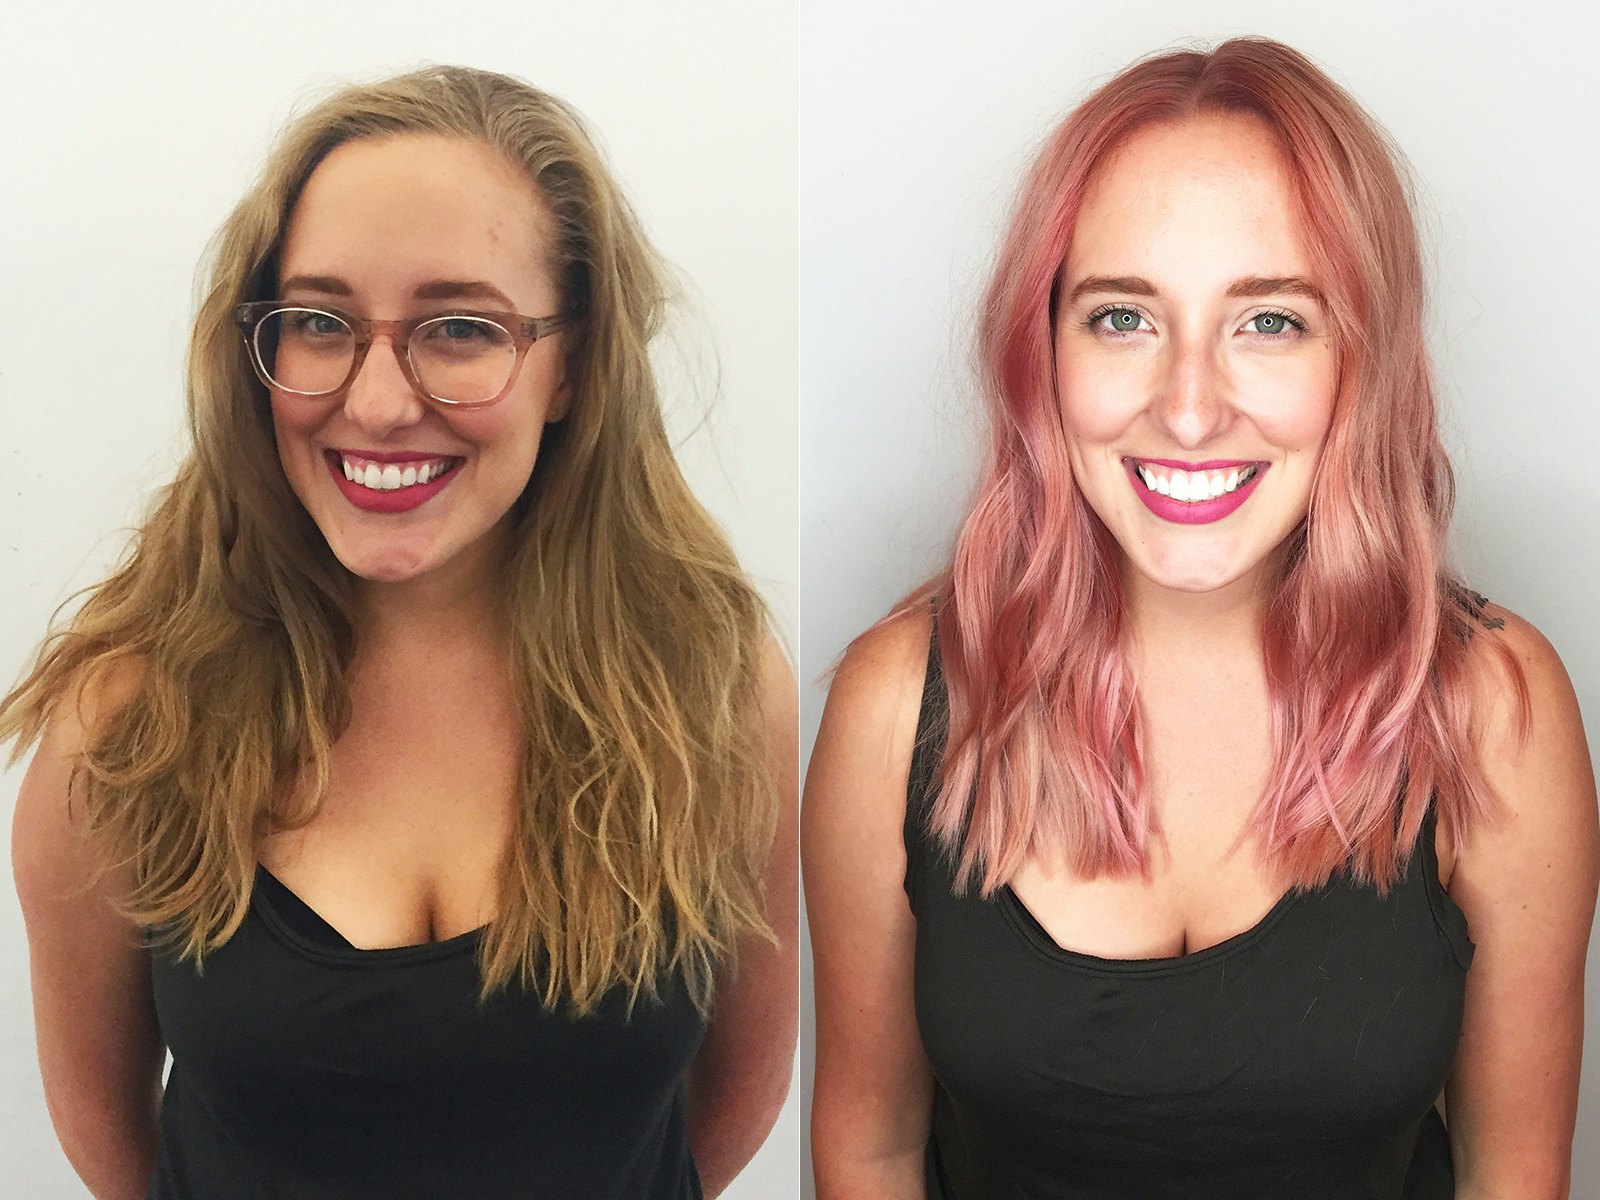 How To Dye Virgin Hair Millennial Pink Without Completely Trashing It